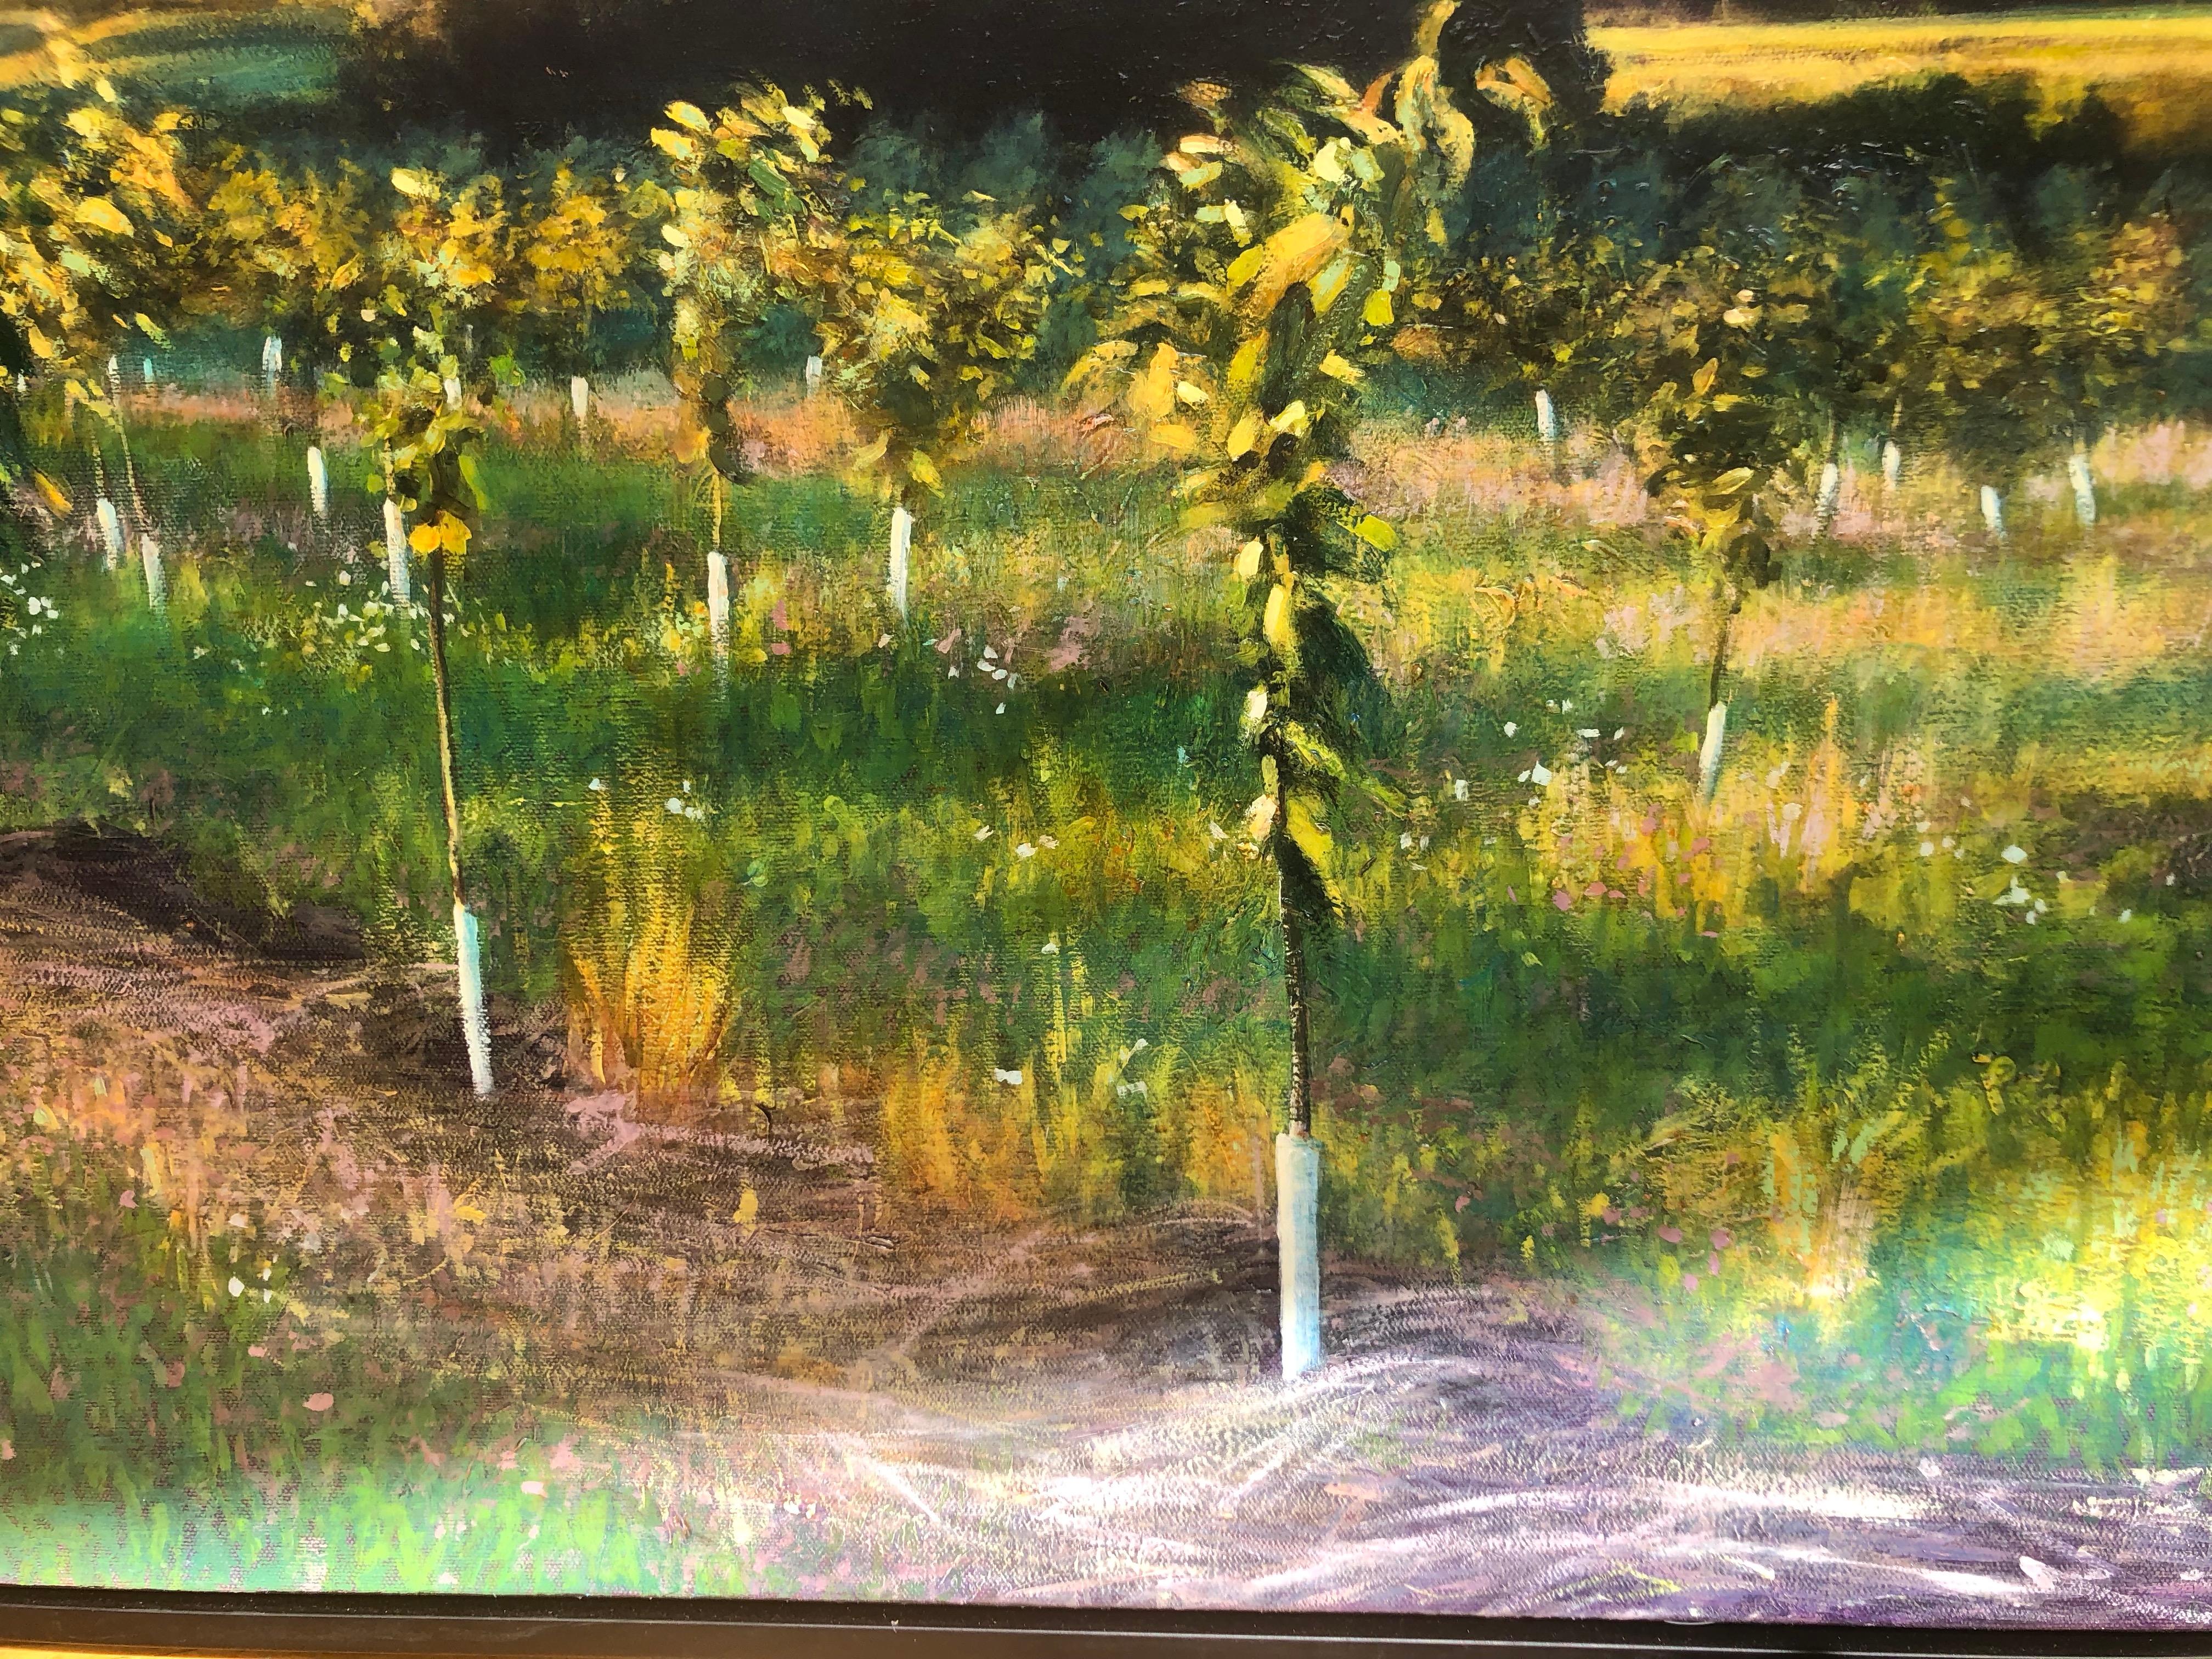 Orchard Path - Original Oil Painting of Orchard and Hills Bathed in Spring Light 6